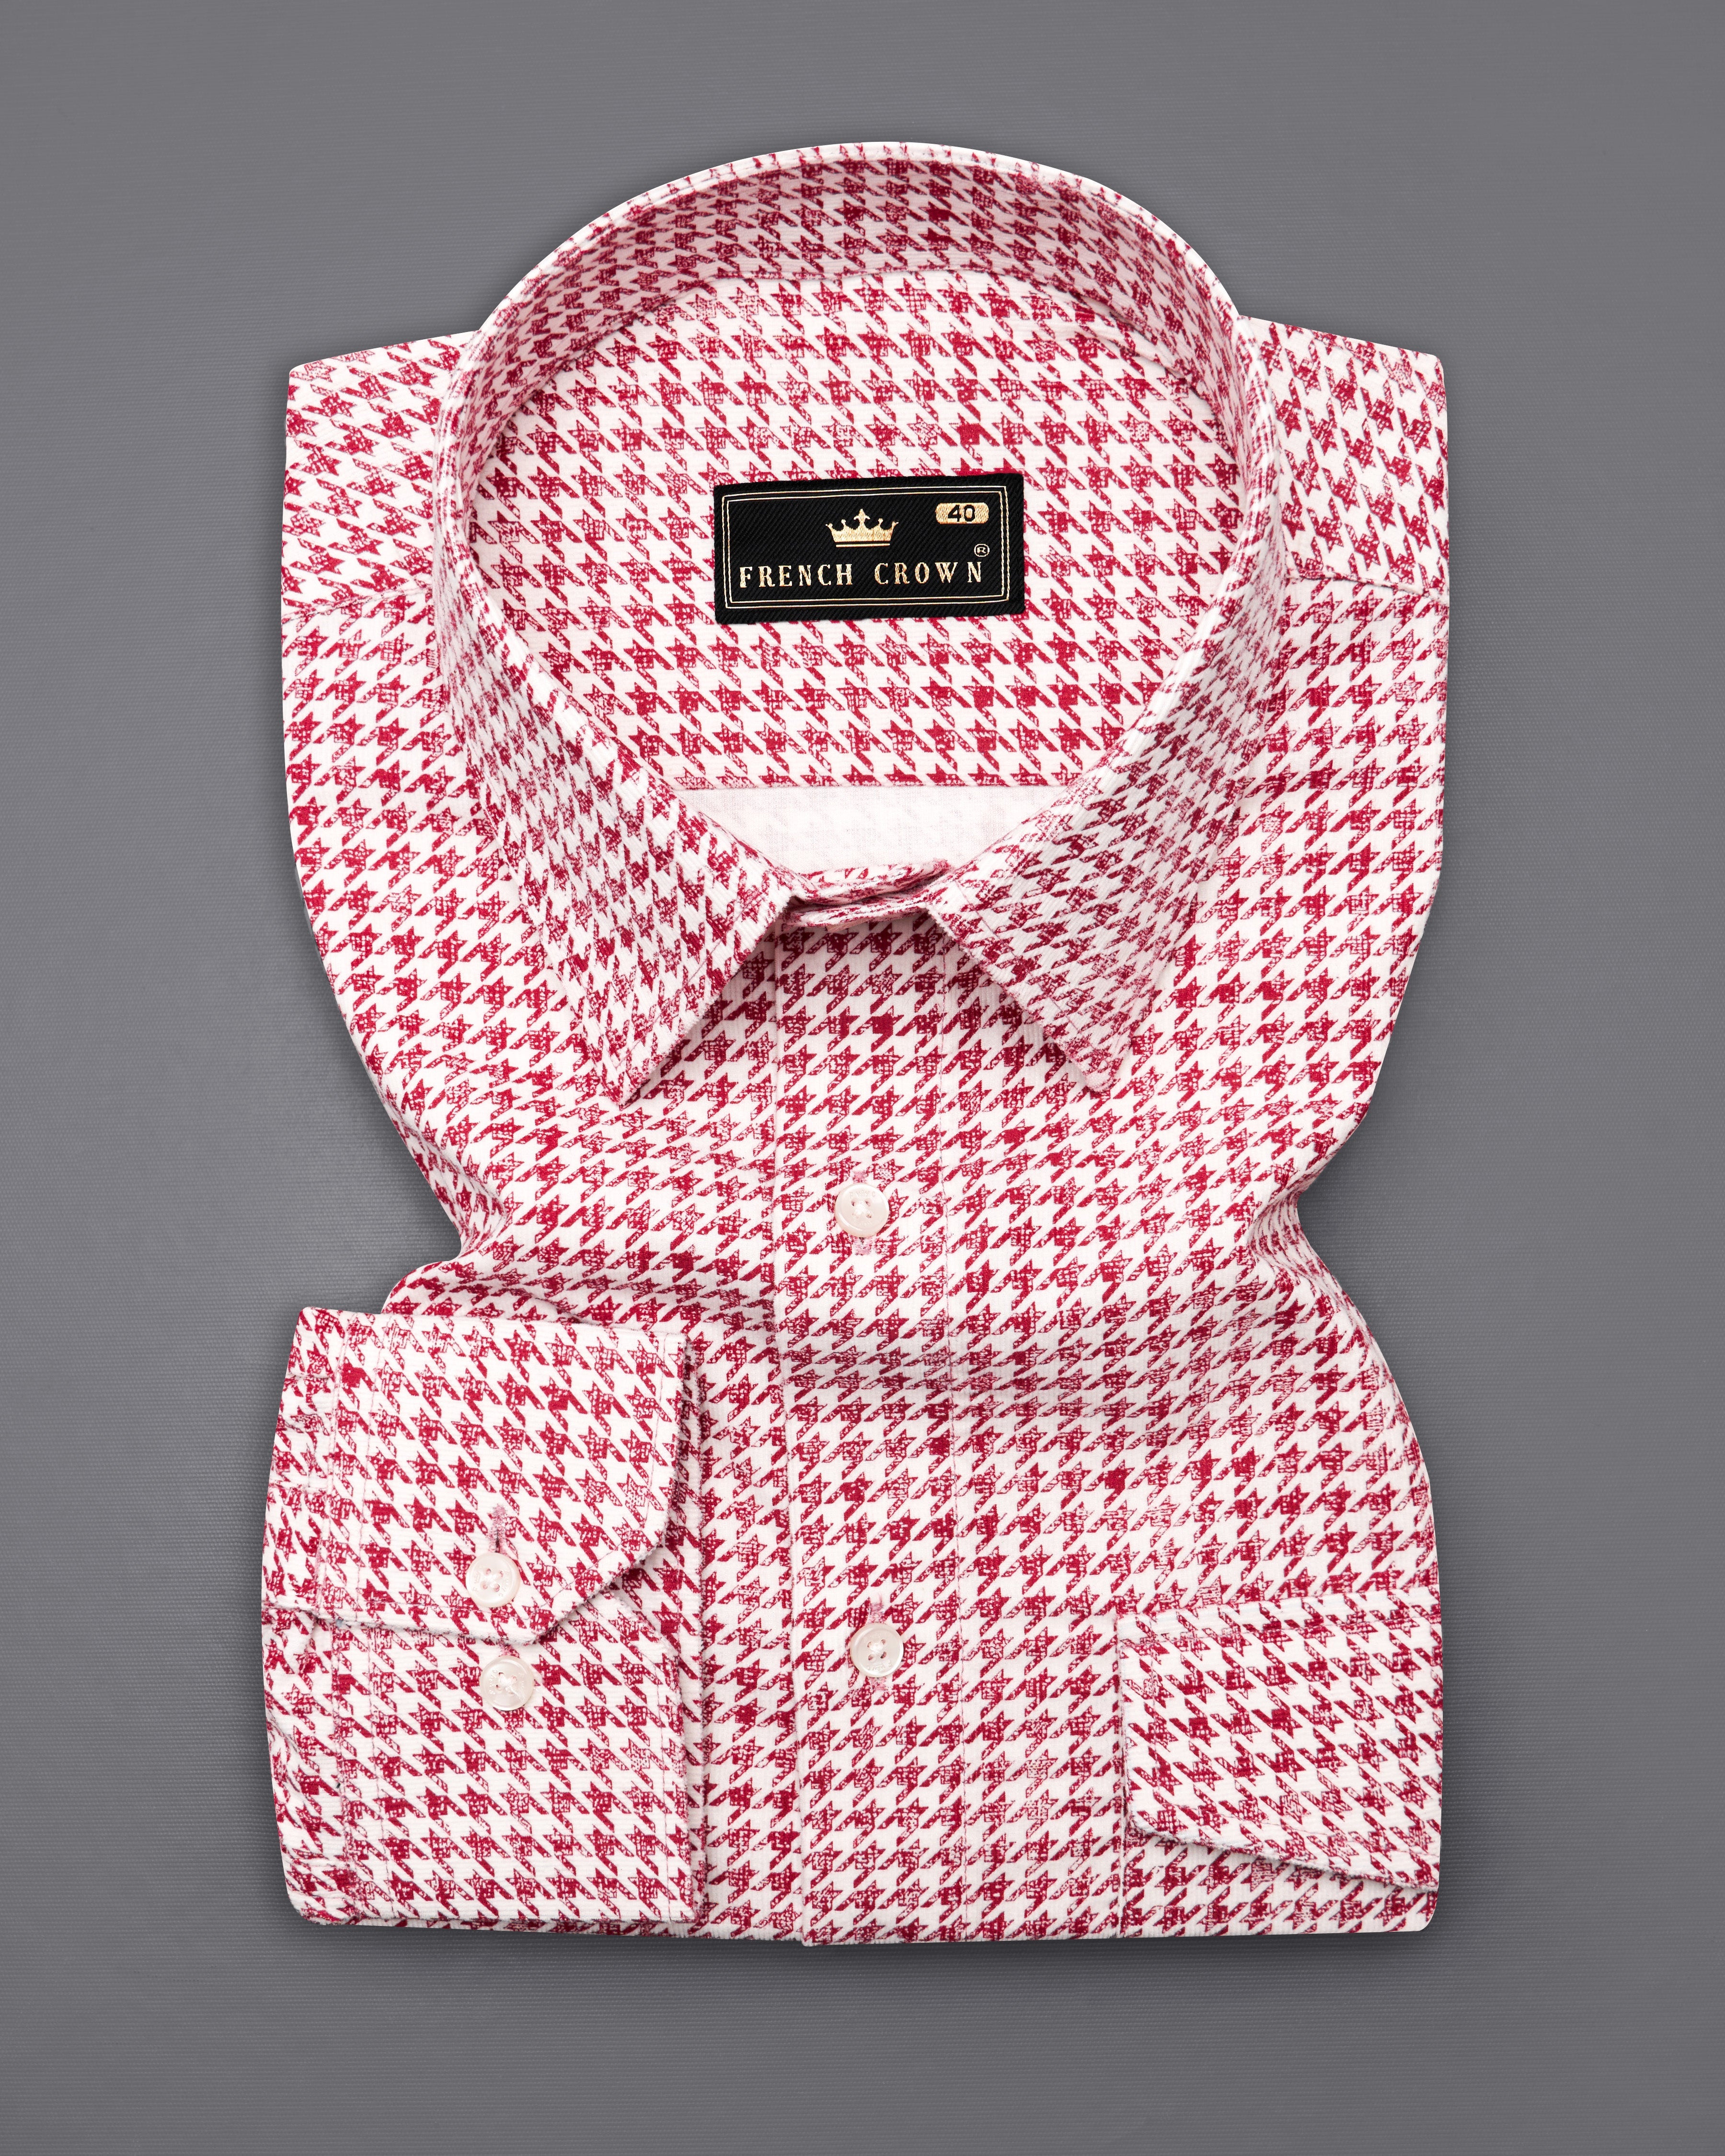 Shiraz Red and White Houndstooth Corduroy Overshirt/Shacket 9916-OS-P301-38, 9916-OS-P301-H-38, 9916-OS-P301-39, 9916-OS-P301-H-39, 9916-OS-P301-40, 9916-OS-P301-H-40, 9916-OS-P301-42, 9916-OS-P301-H-42, 9916-OS-P301-44, 9916-OS-P301-H-44, 9916-OS-P301-46, 9916-OS-P301-H-46, 9916-OS-P301-48, 9916-OS-P301-H-48, 9916-OS-P301-50, 9916-OS-P301-H-50, 9916-OS-P301-52, 9916-OS-P301-H-52